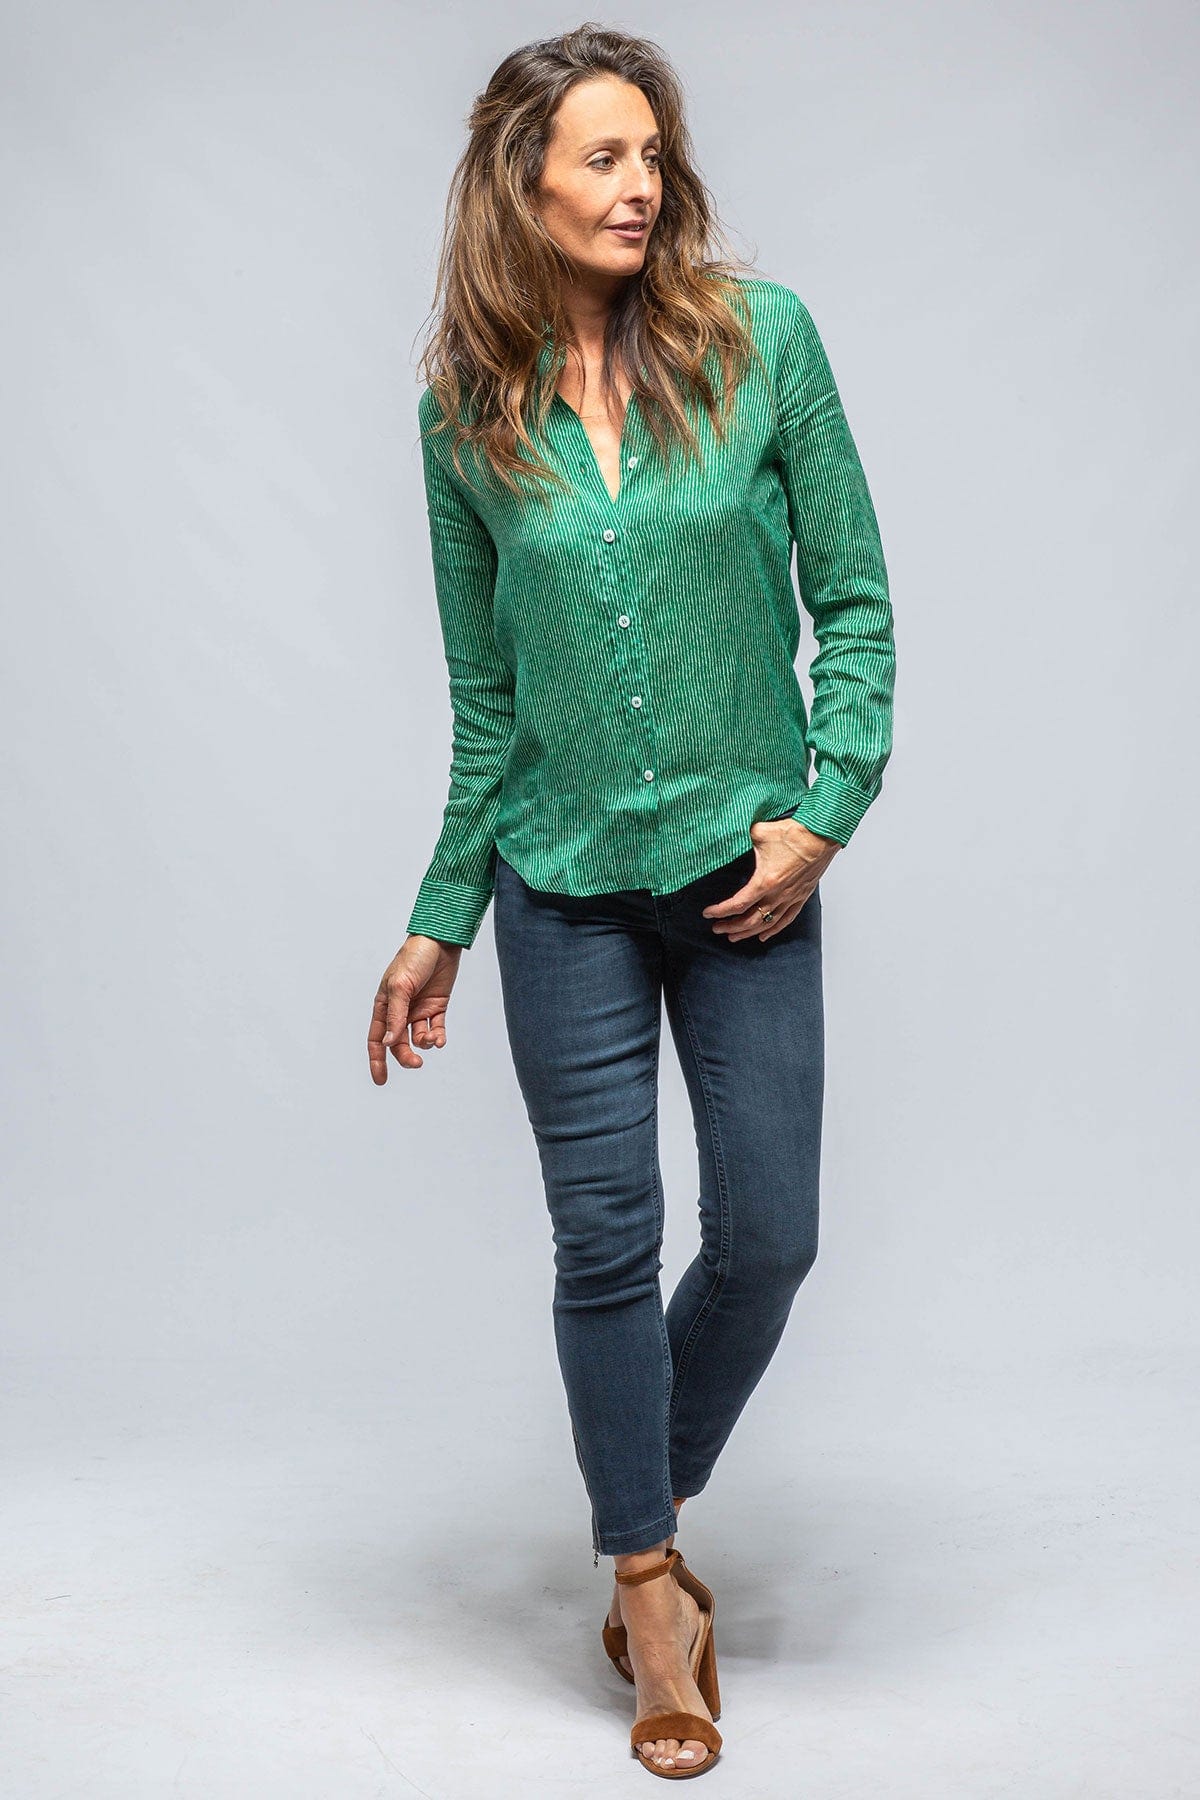 Dolce Thin Stripe Silk Blouse In Jade/White - AXEL'S